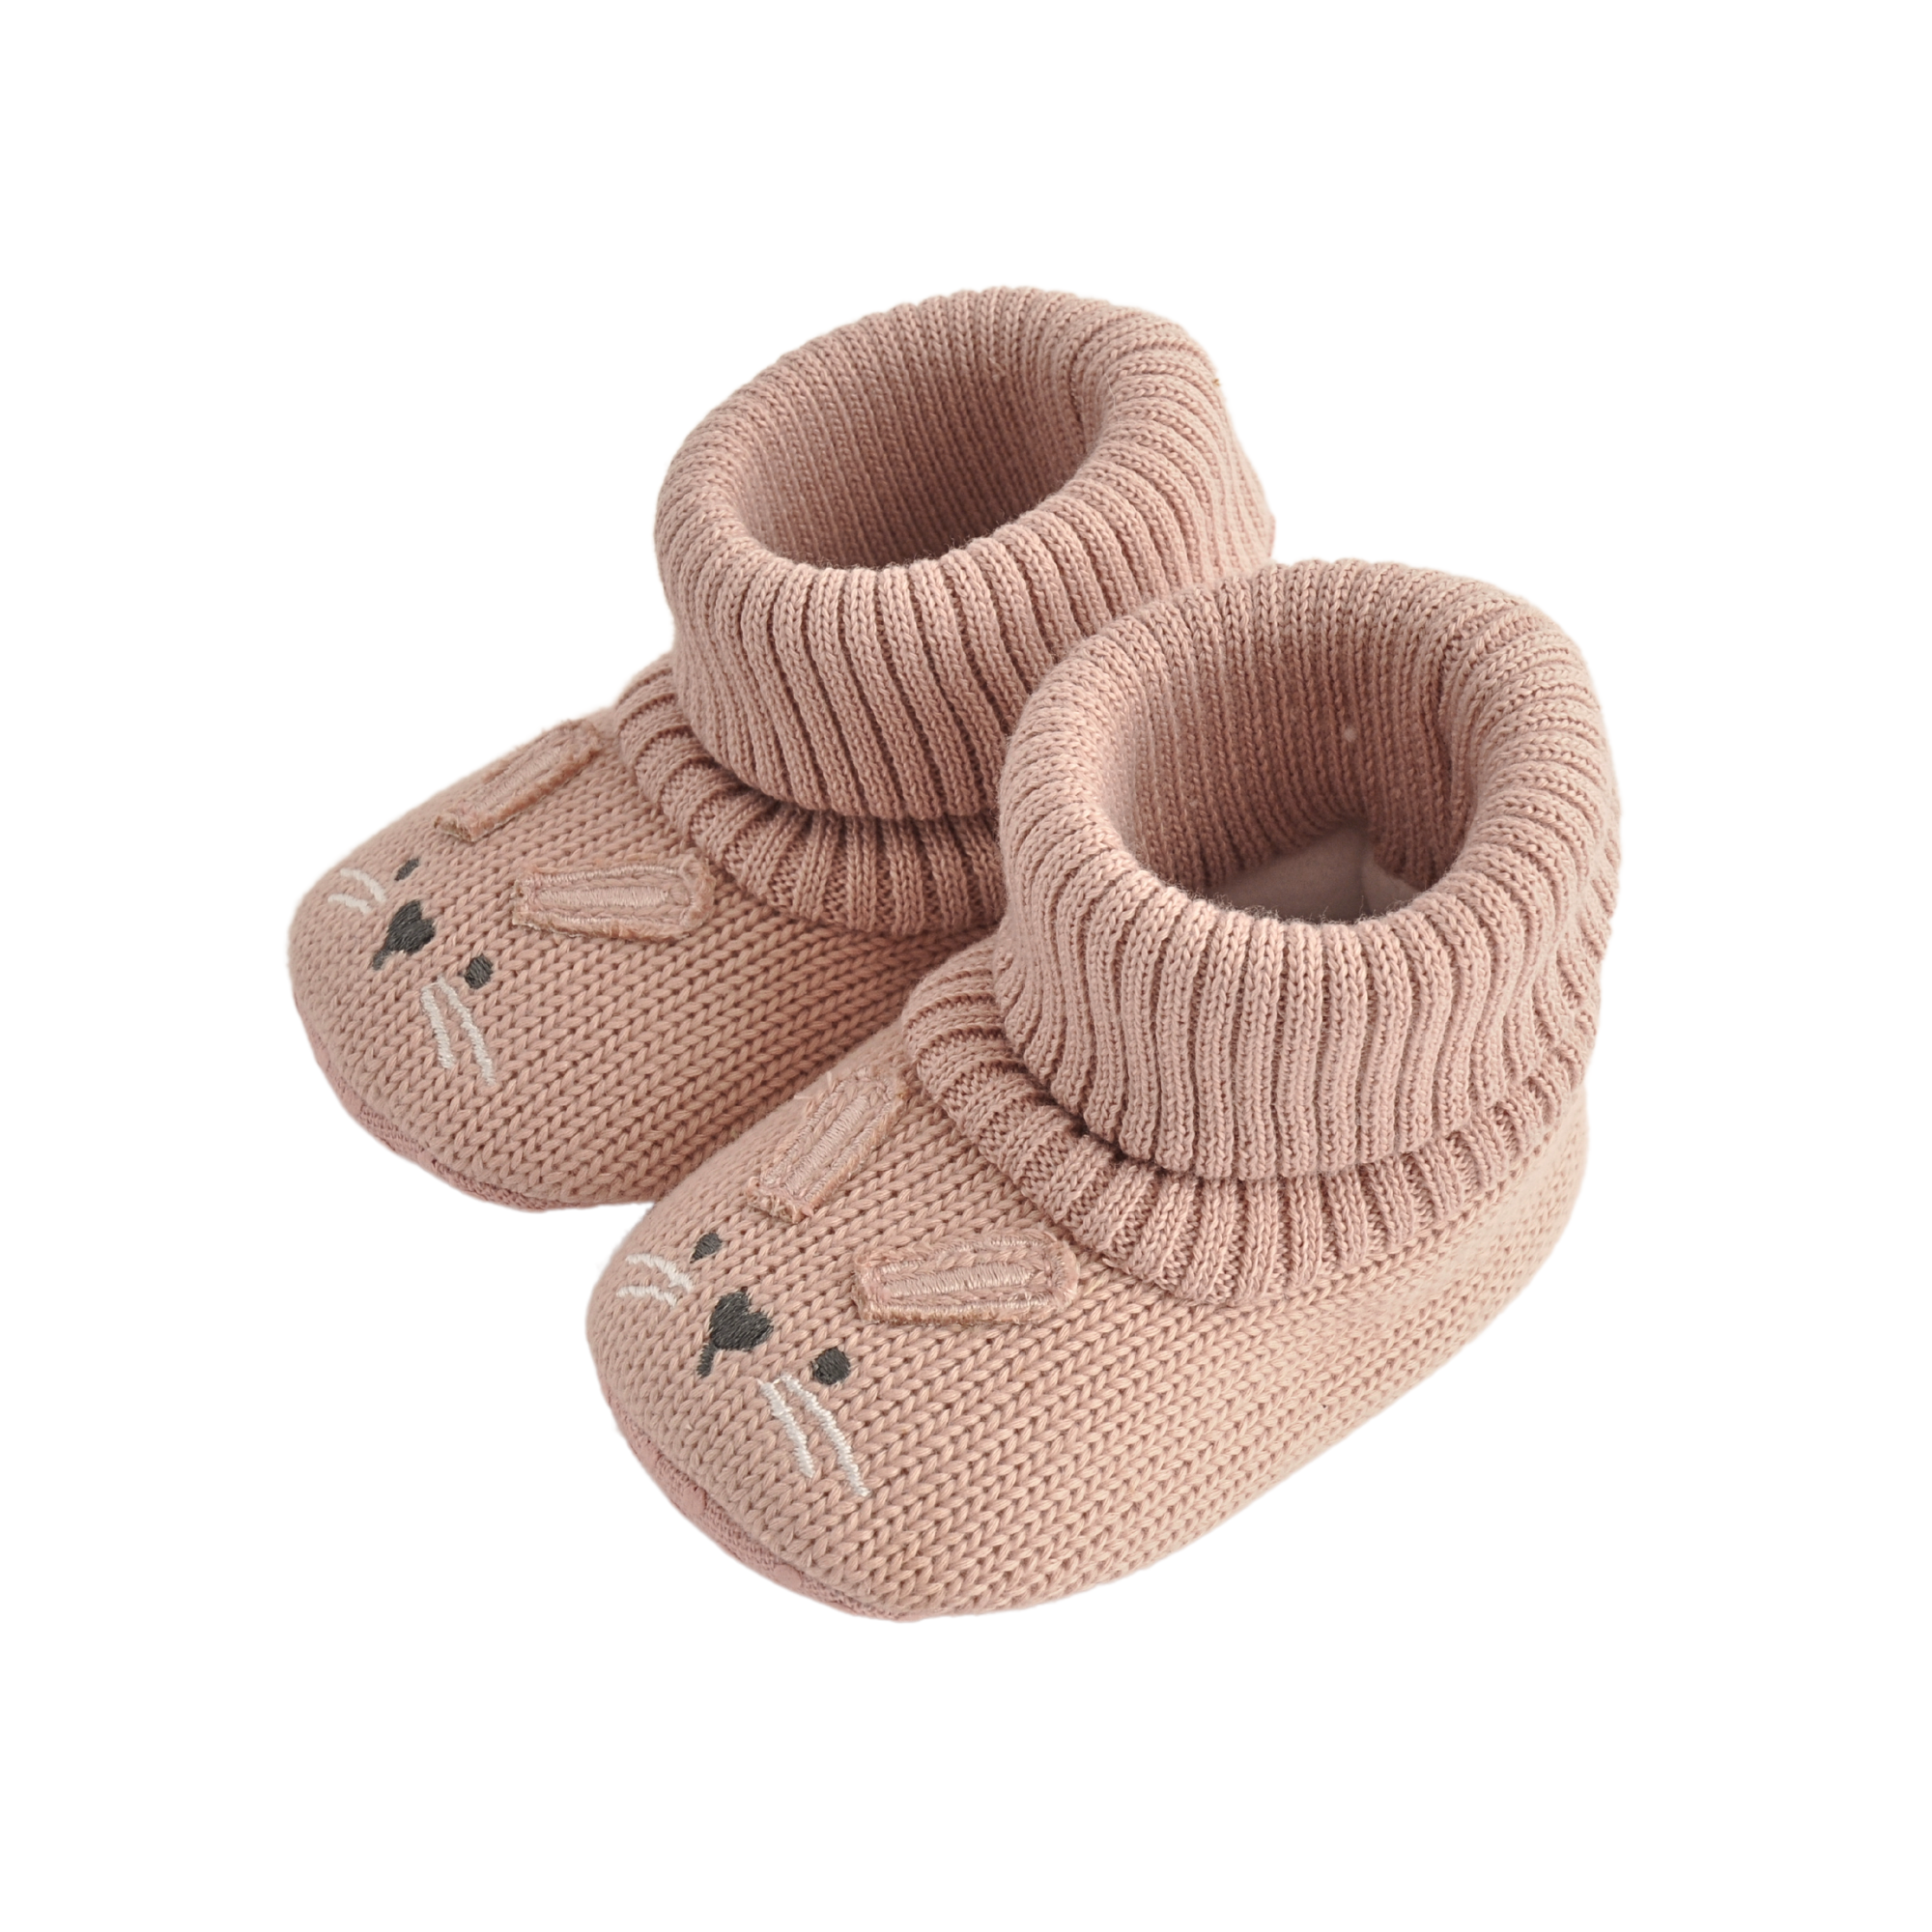 Baby Novelty Knitted Booties 6-12M - Bunny